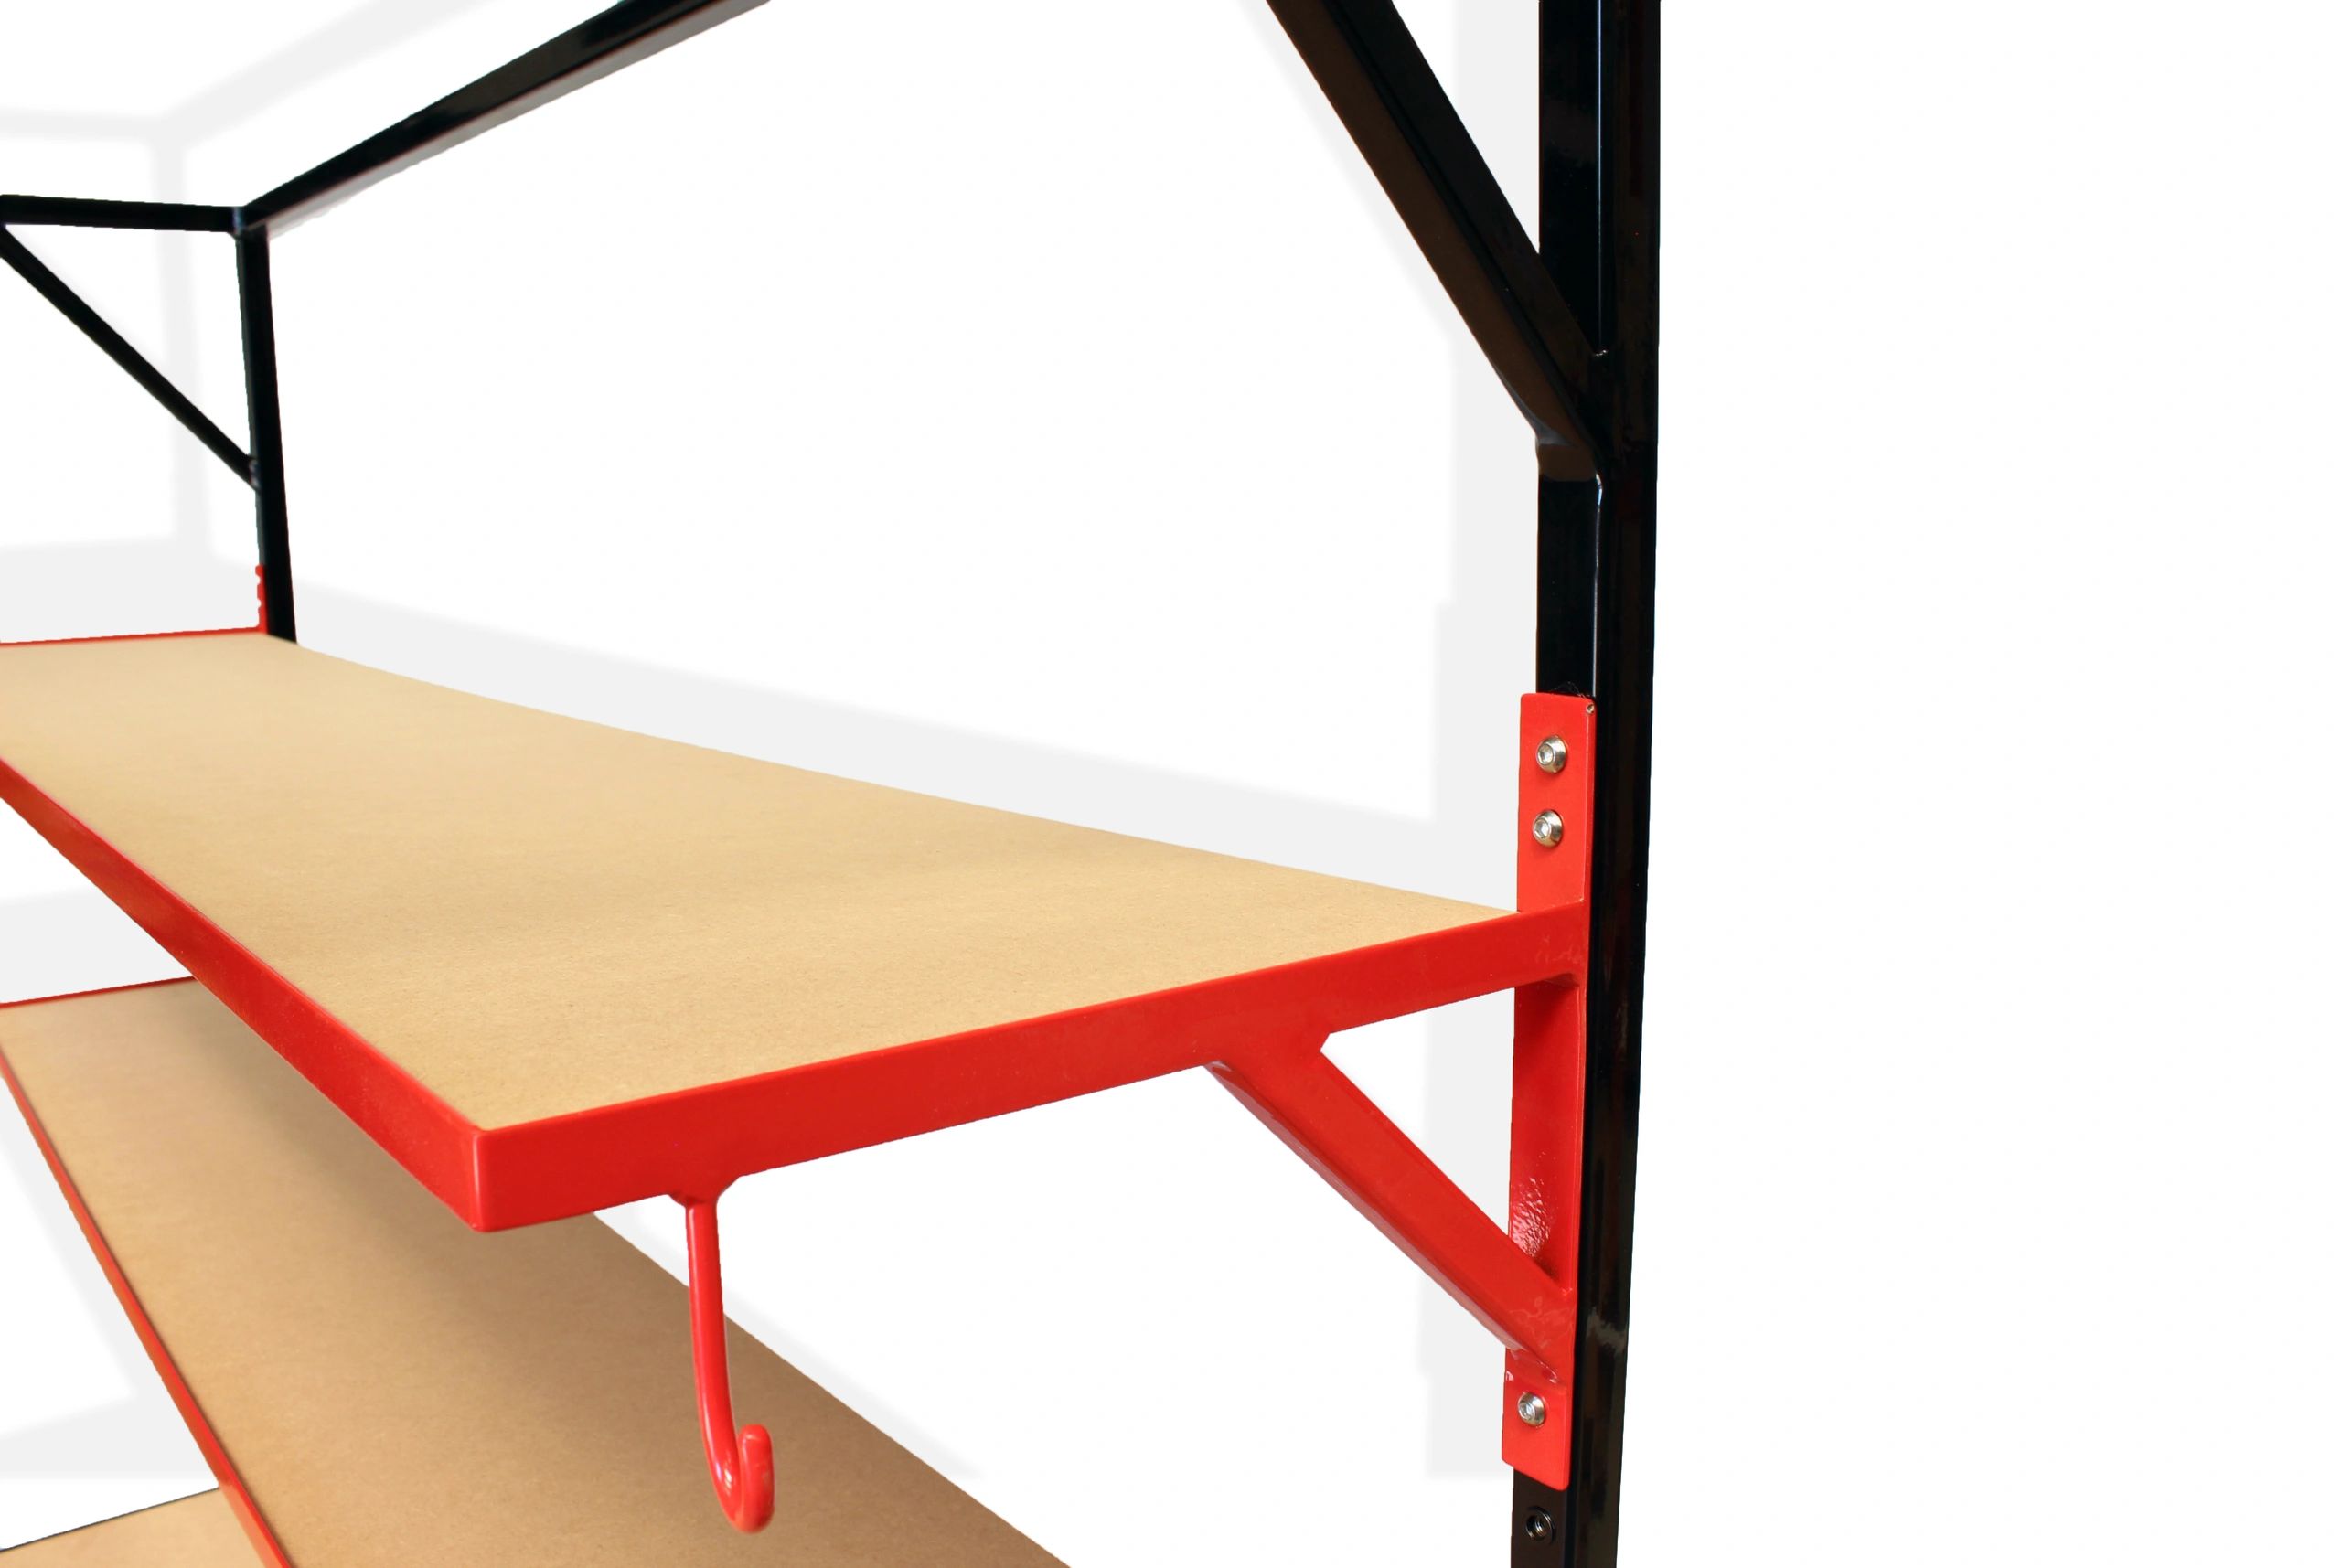 packing station, adjustable shelves, customizable, workspace, packaging requirements.